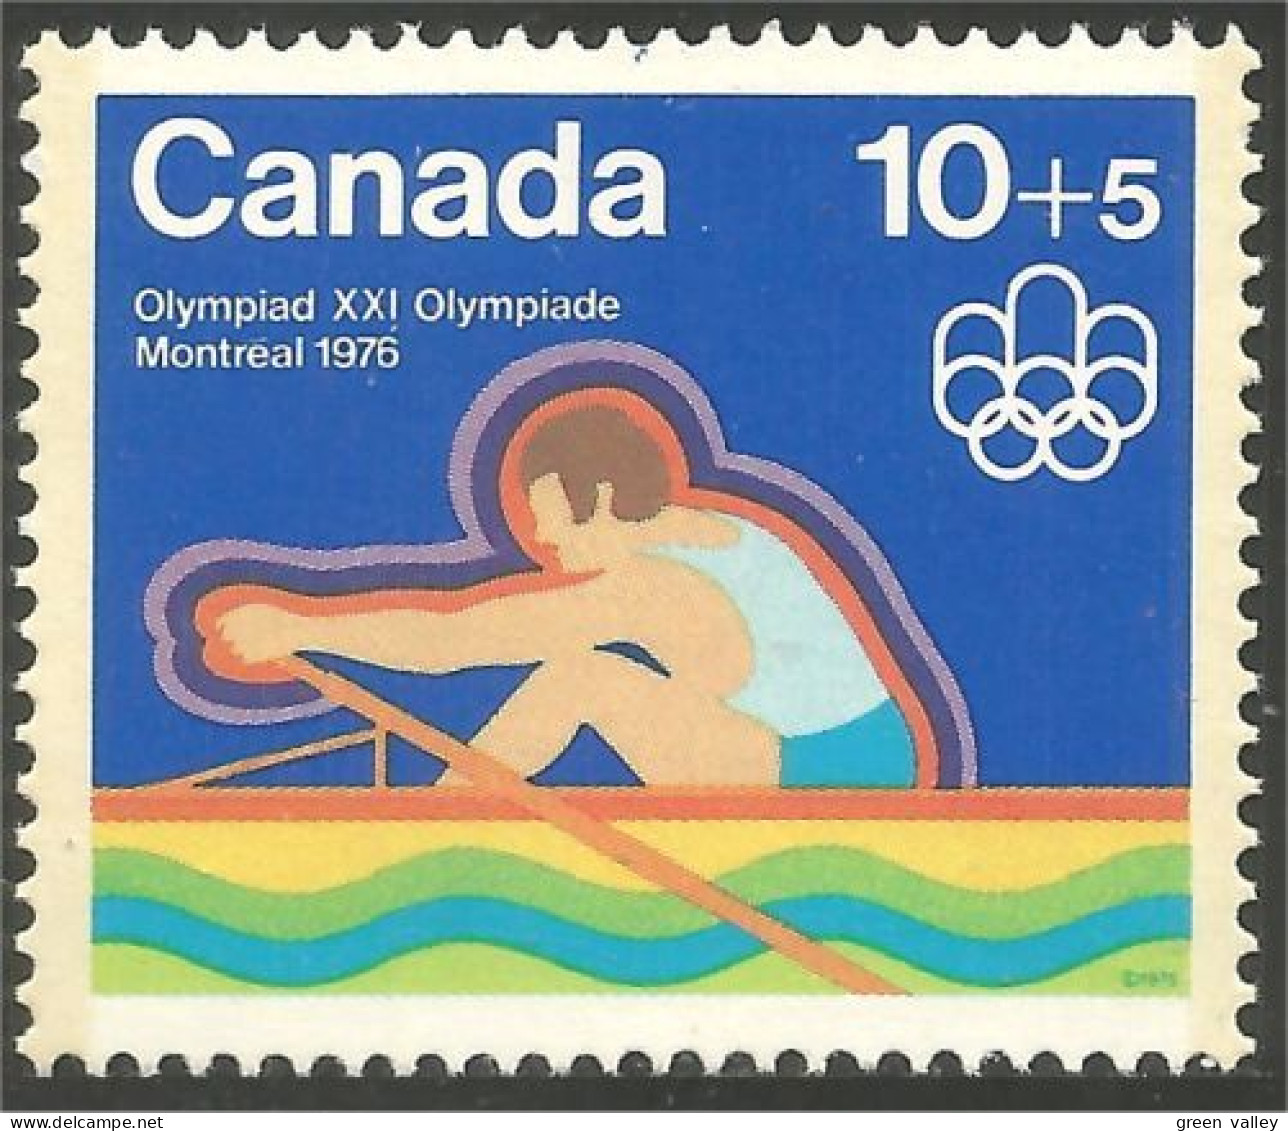 Canada 10c+5c Aviron Rowing Jeux Olympiques Montreal 1976 Olympic Games MNH ** Neuf SC (CB-05c) - Sommer 1976: Montreal